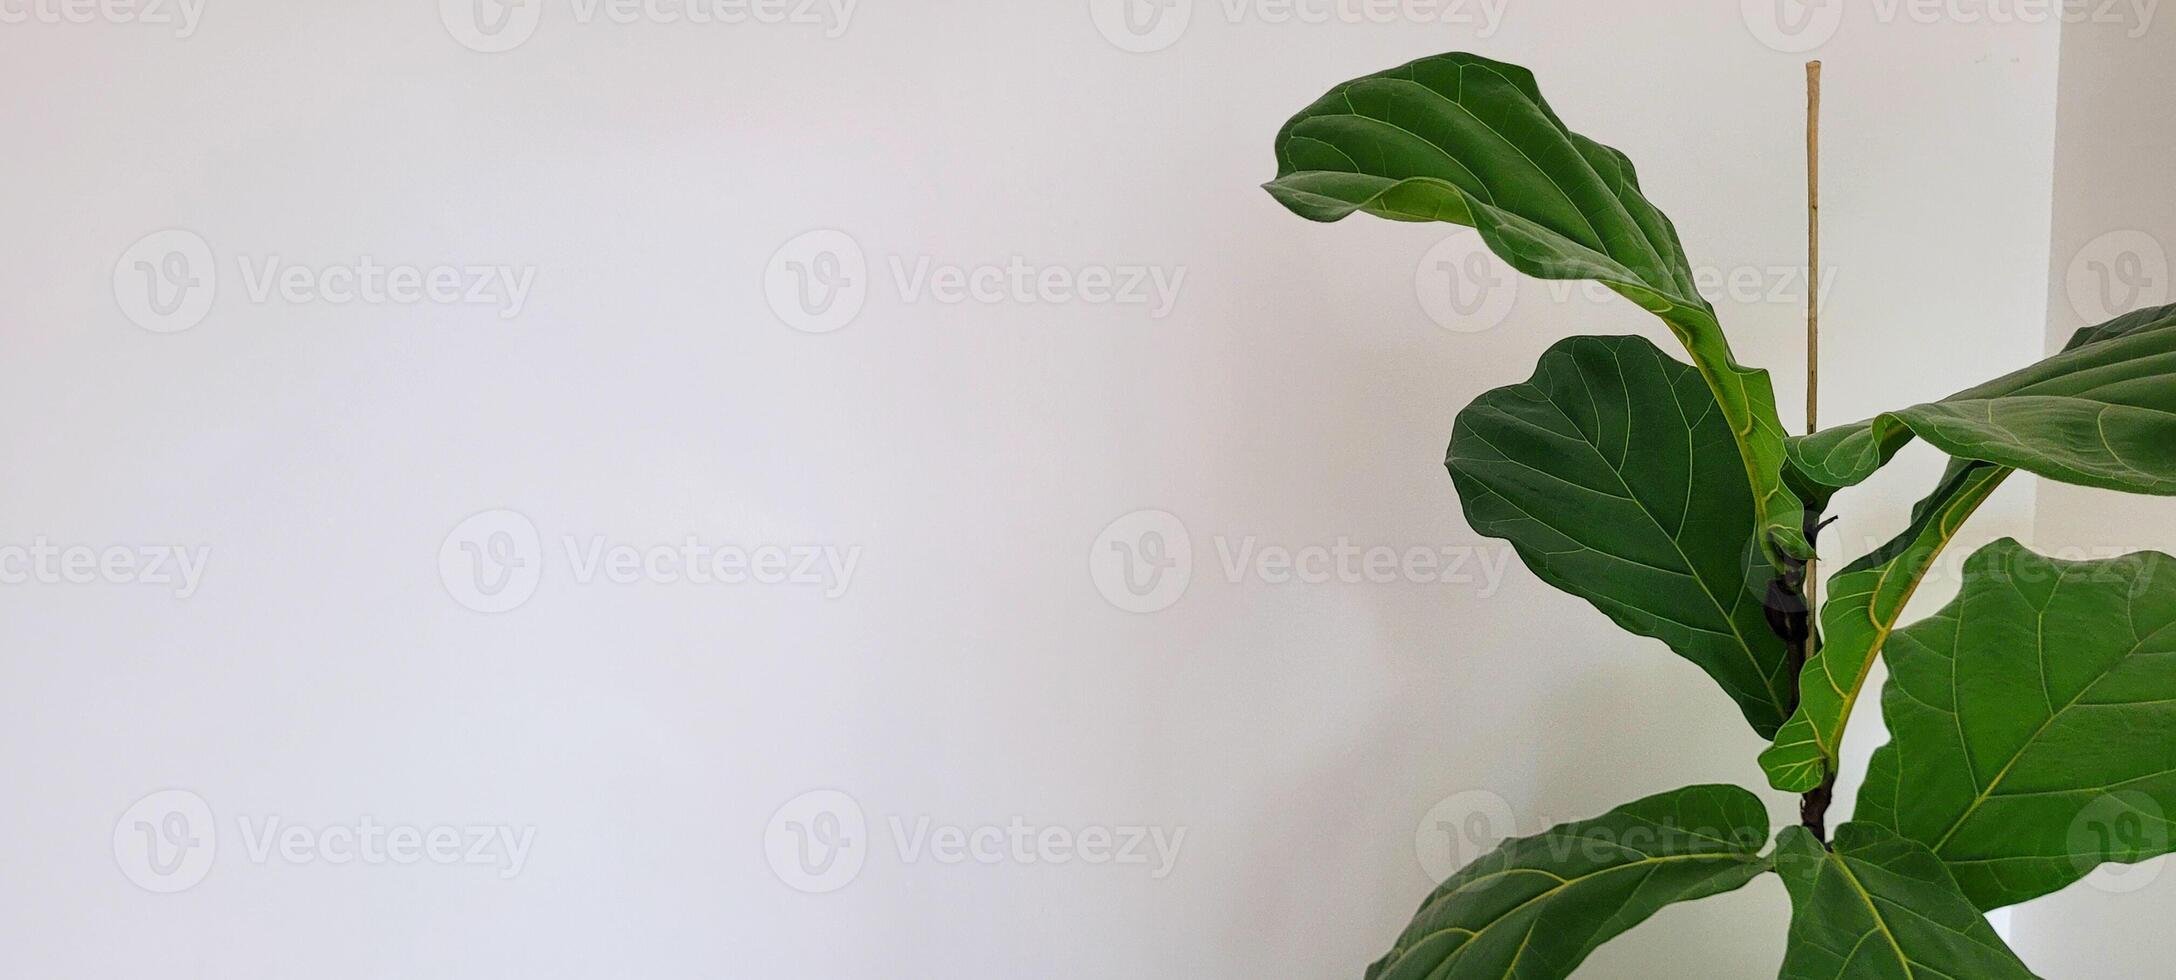 tropical plant with green leaves photo